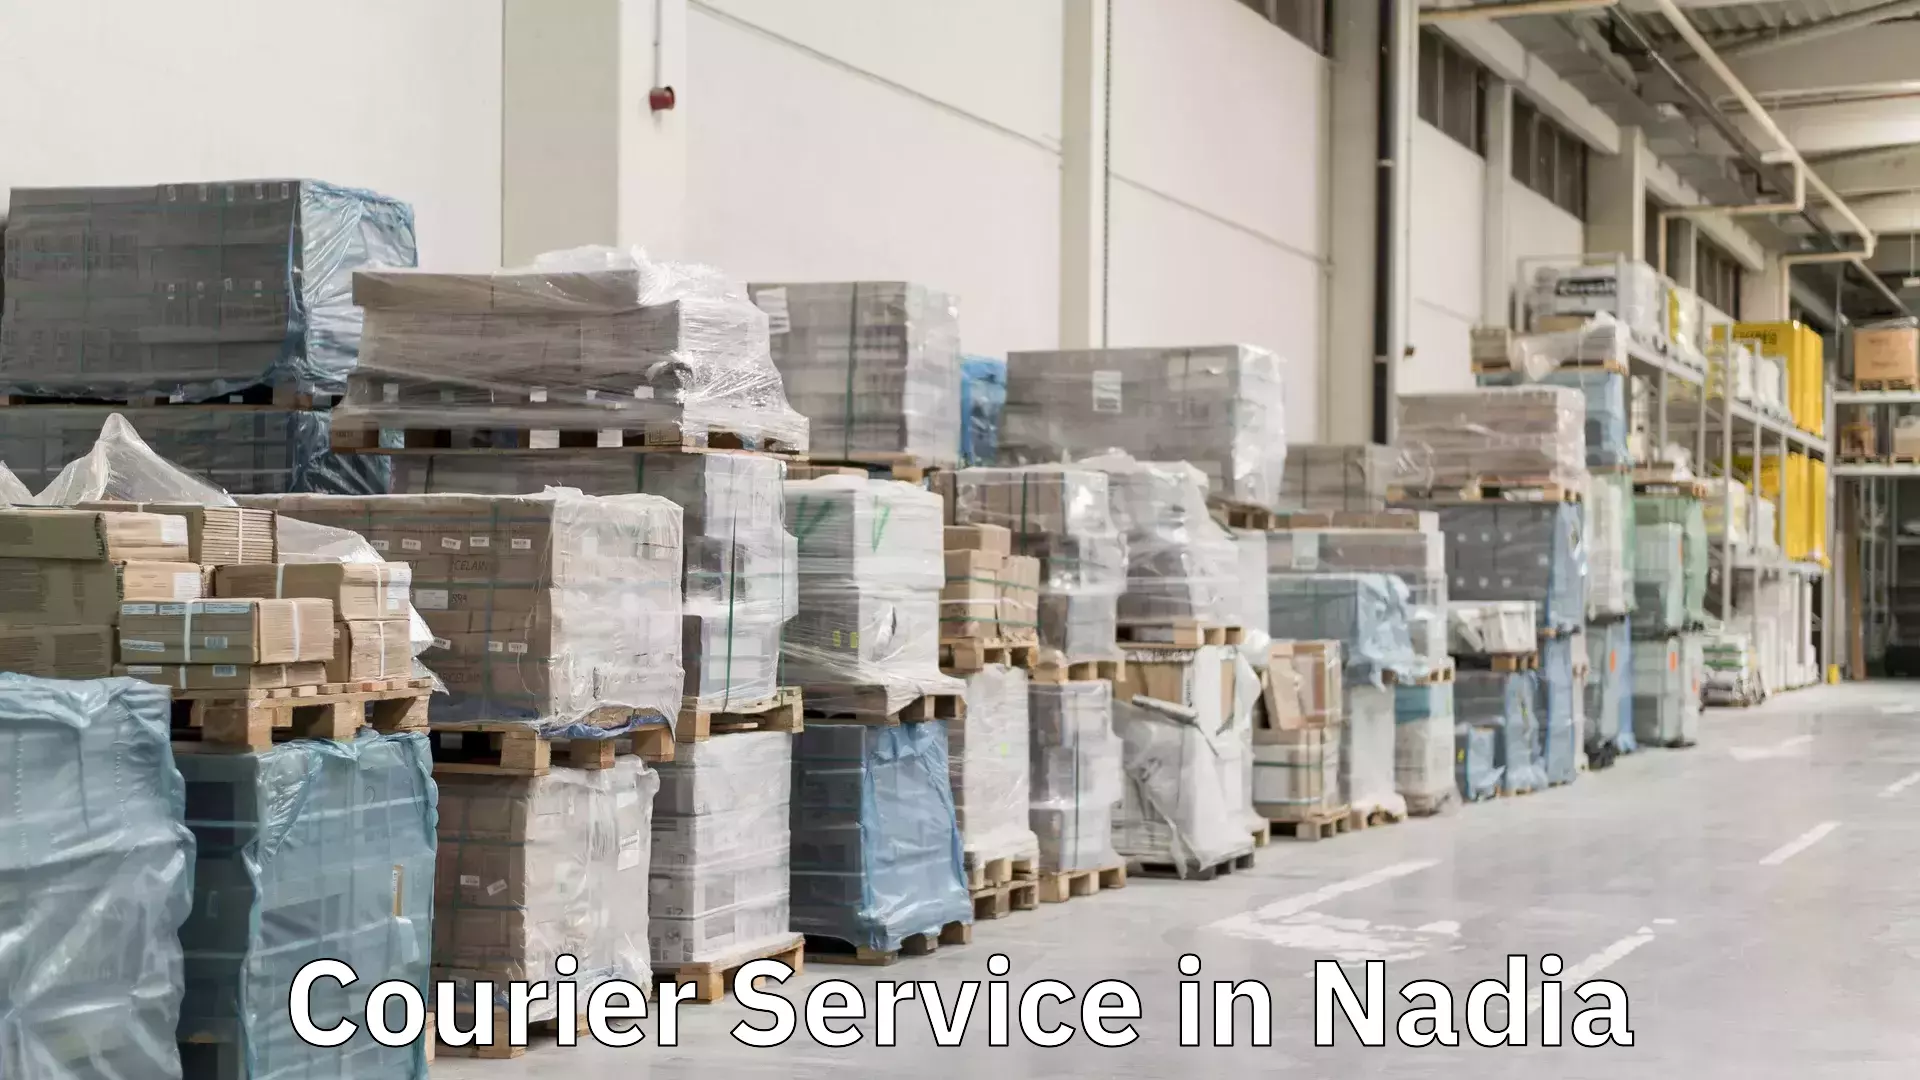 Cost-effective shipping solutions in Nadia